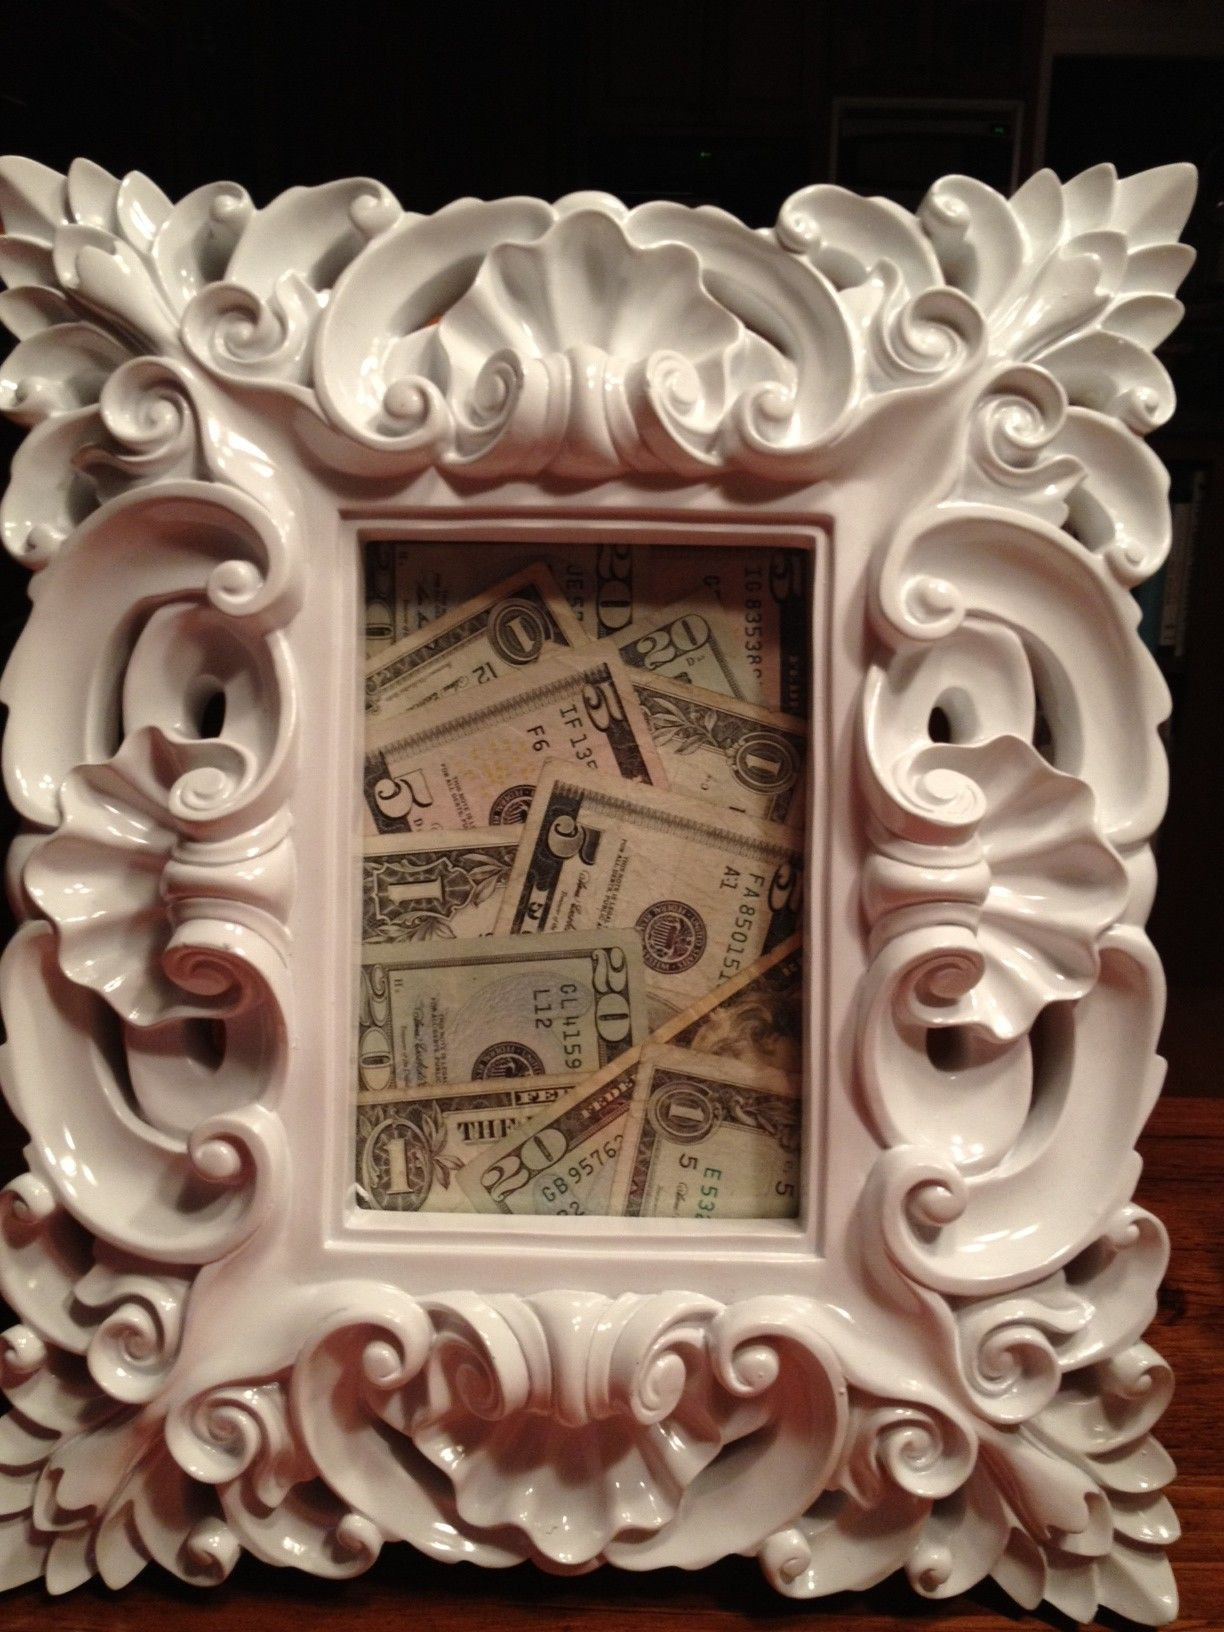 Wedding Gift Money Ideas
 The hi brow way to give money for a wedding